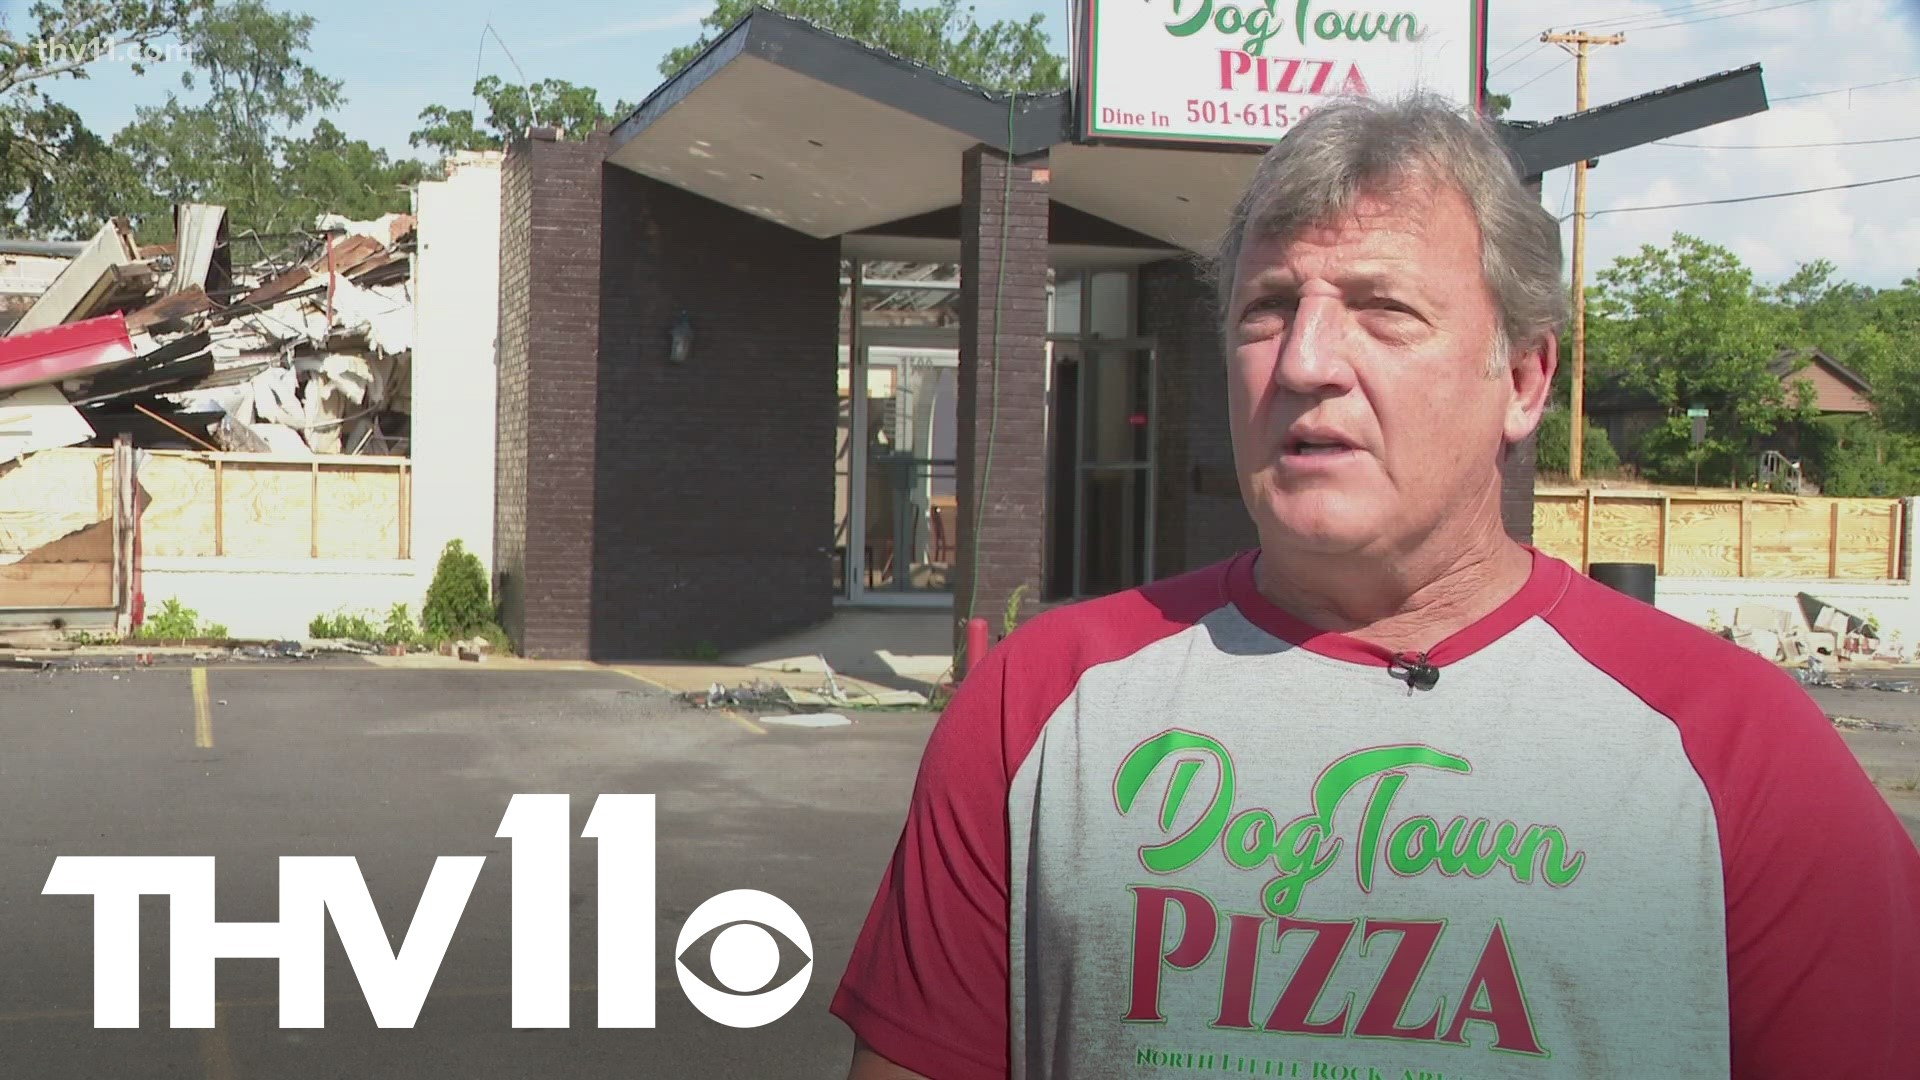 It only took a few months for Dog Town Pizza to become a mainstay in North Little Rock. However, the owner is now asking the community for help.